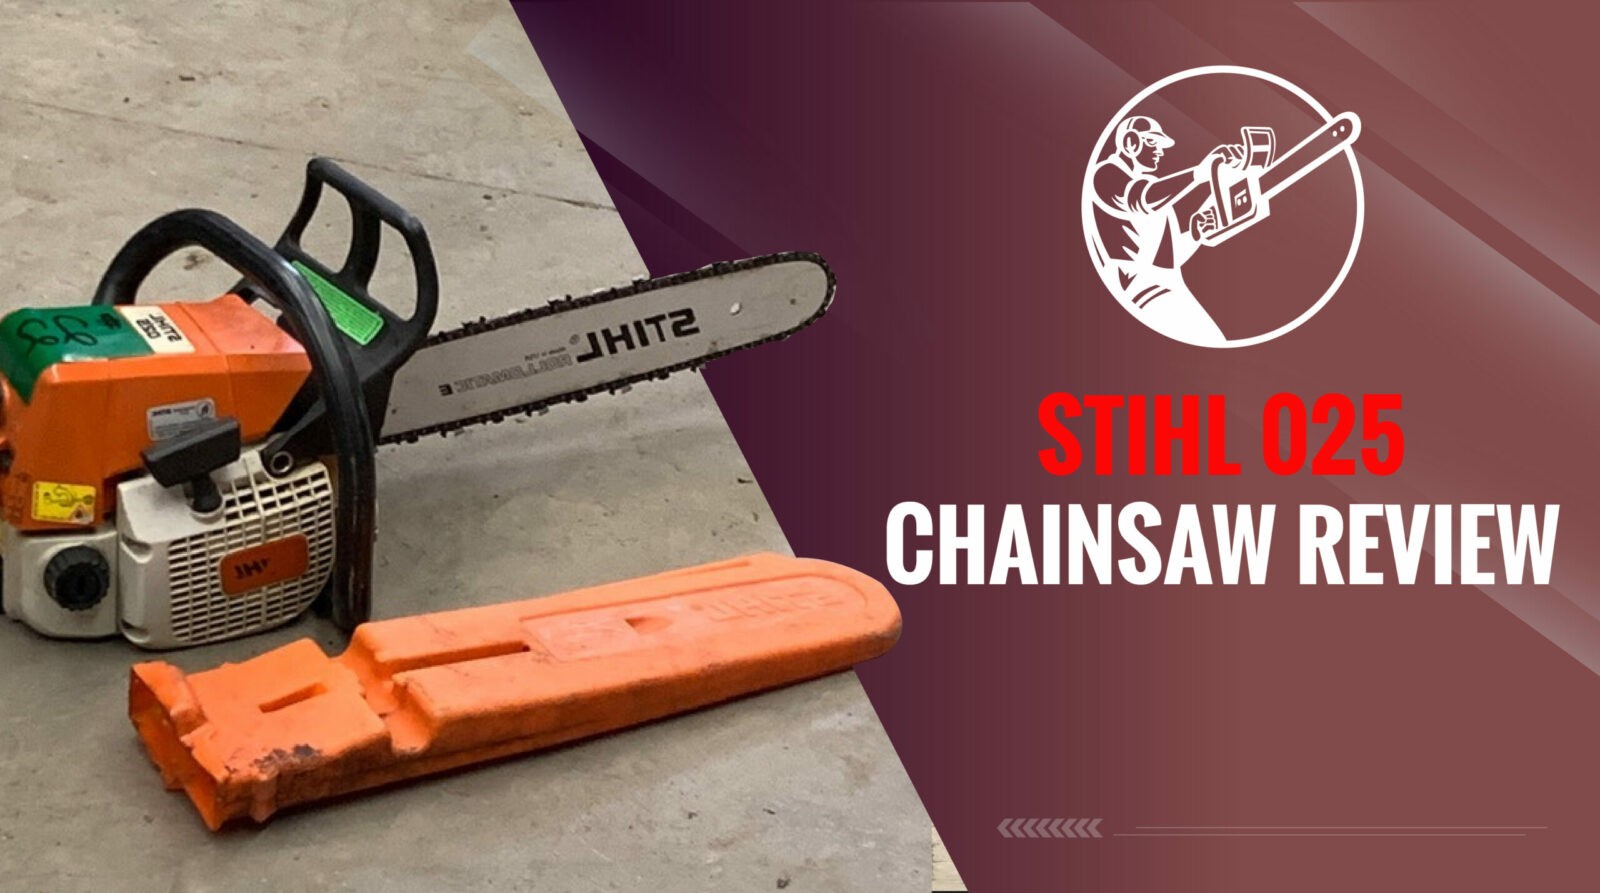 Stihl 025 Chainsaw Review – Is This A Good Saw